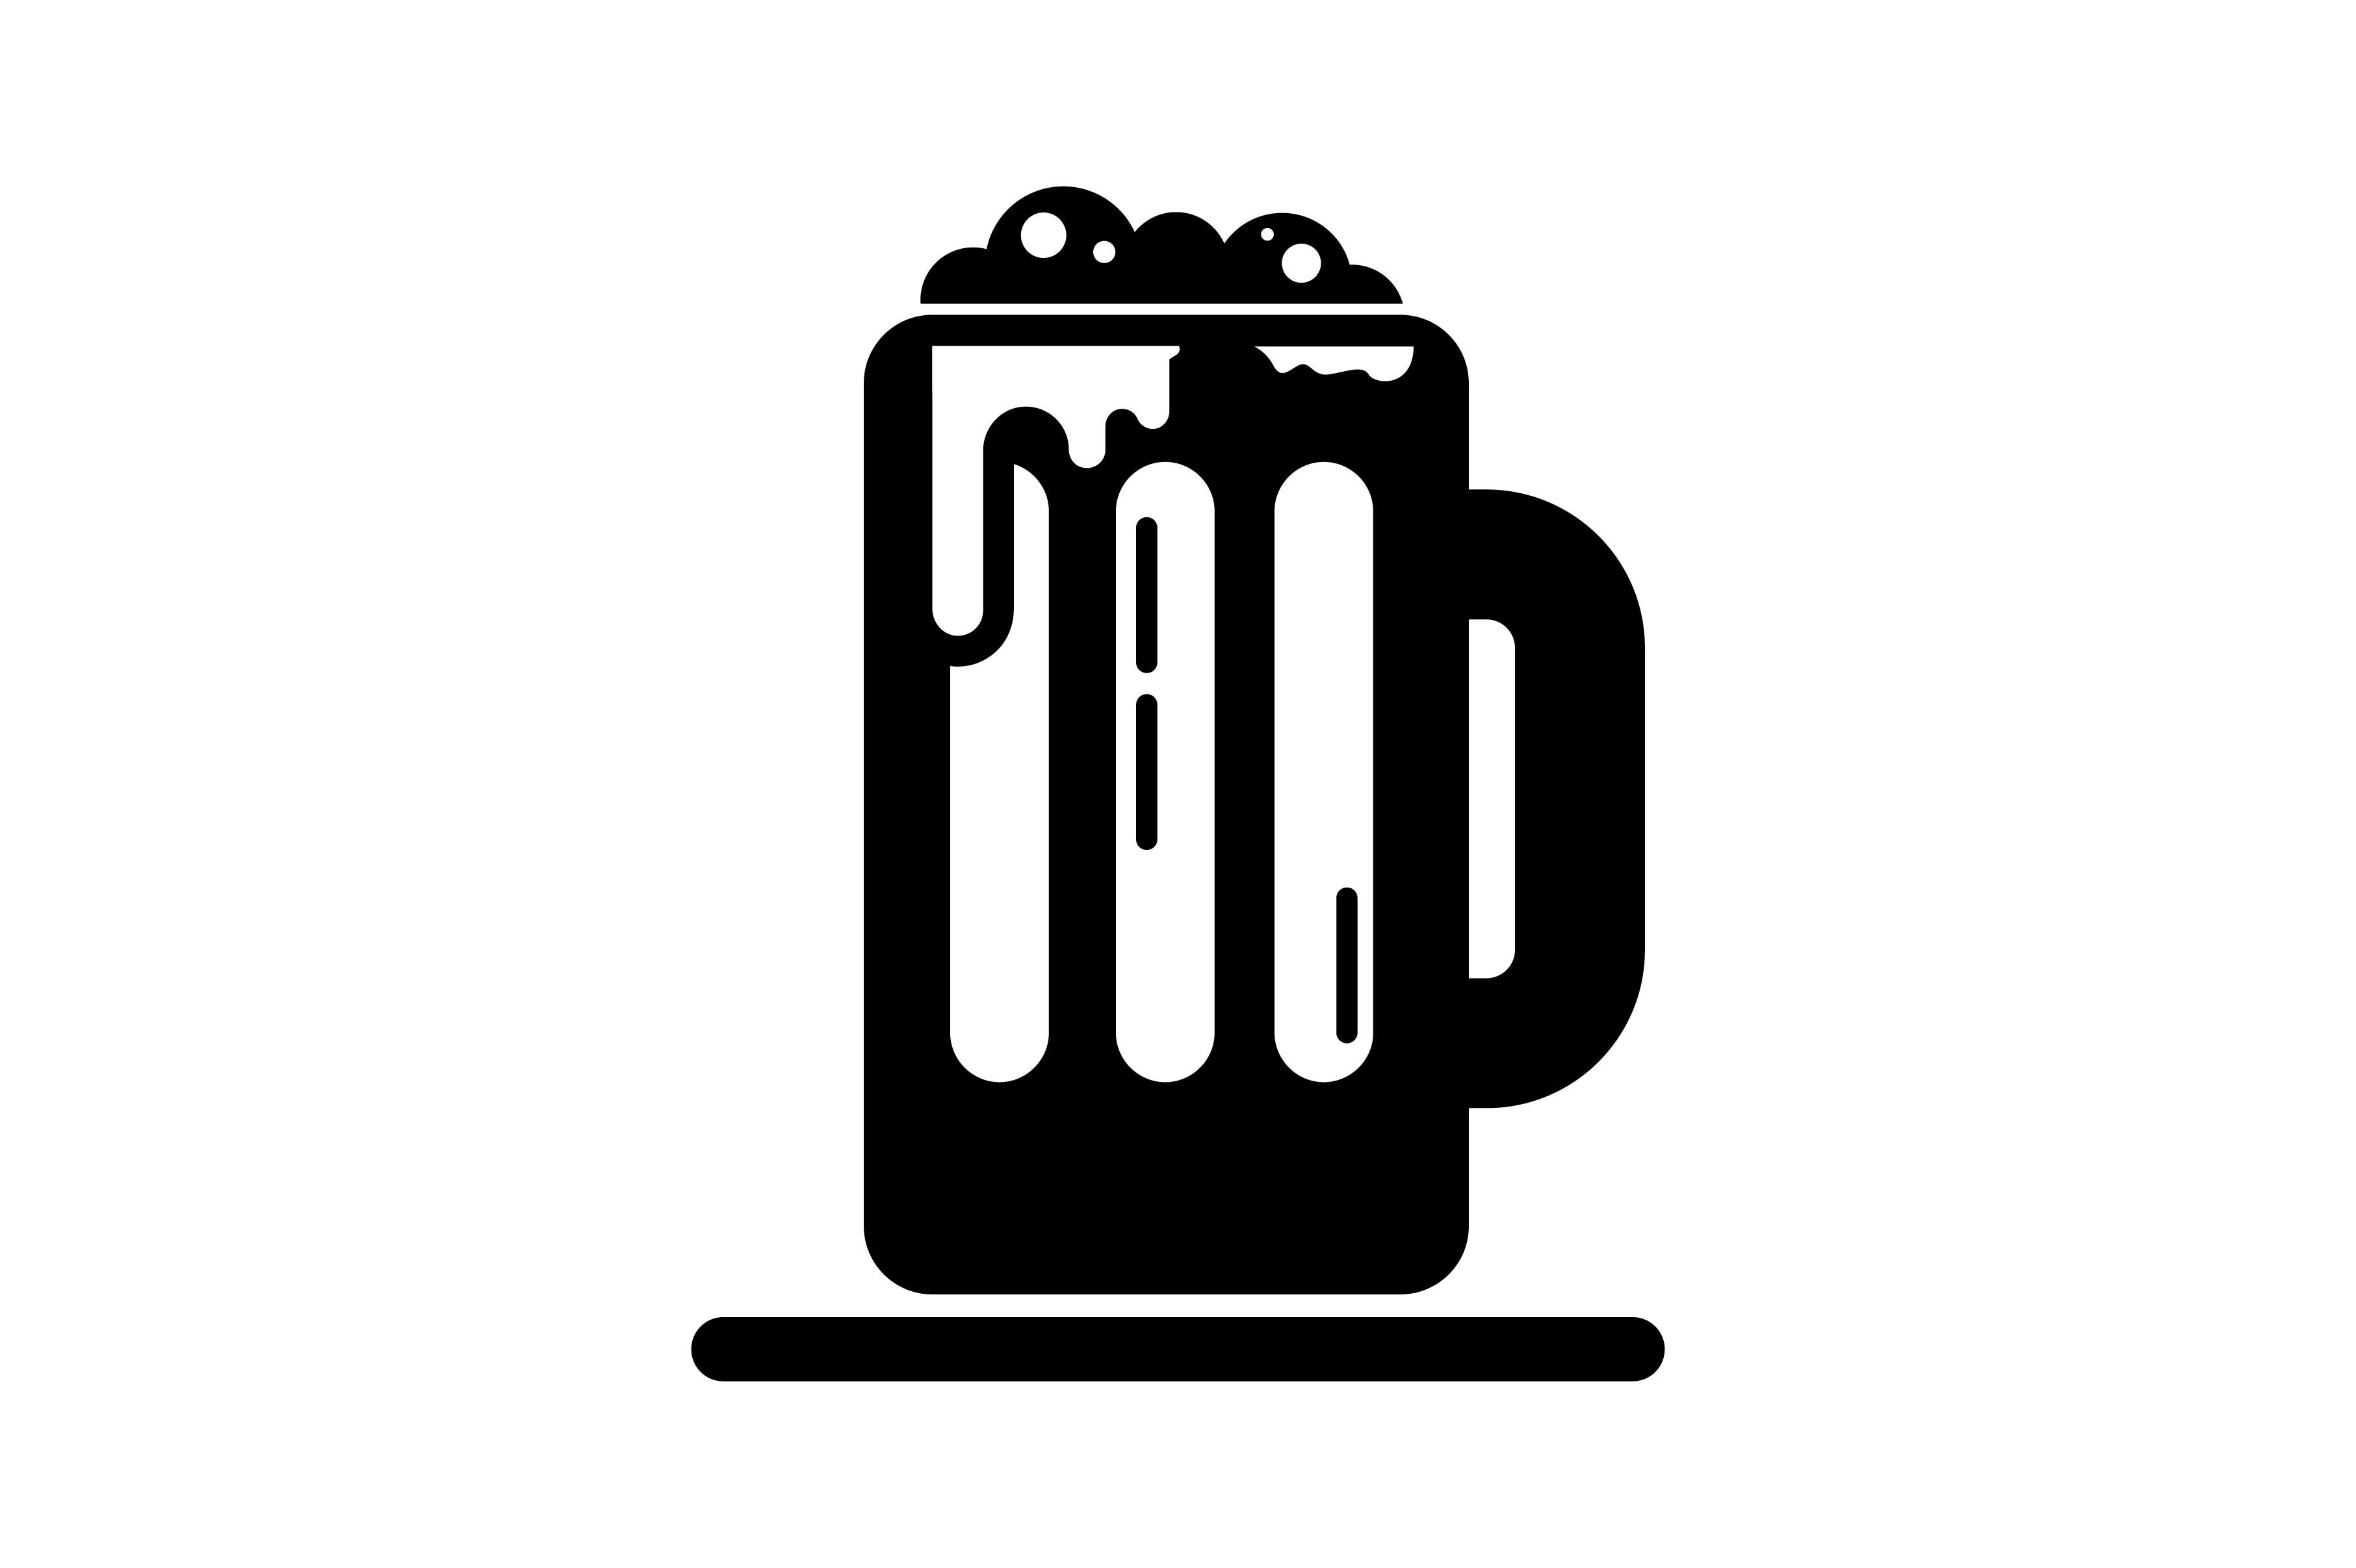 Summer Icon Silhouette a Glass of Beer Graphic by destawastudio1 ...